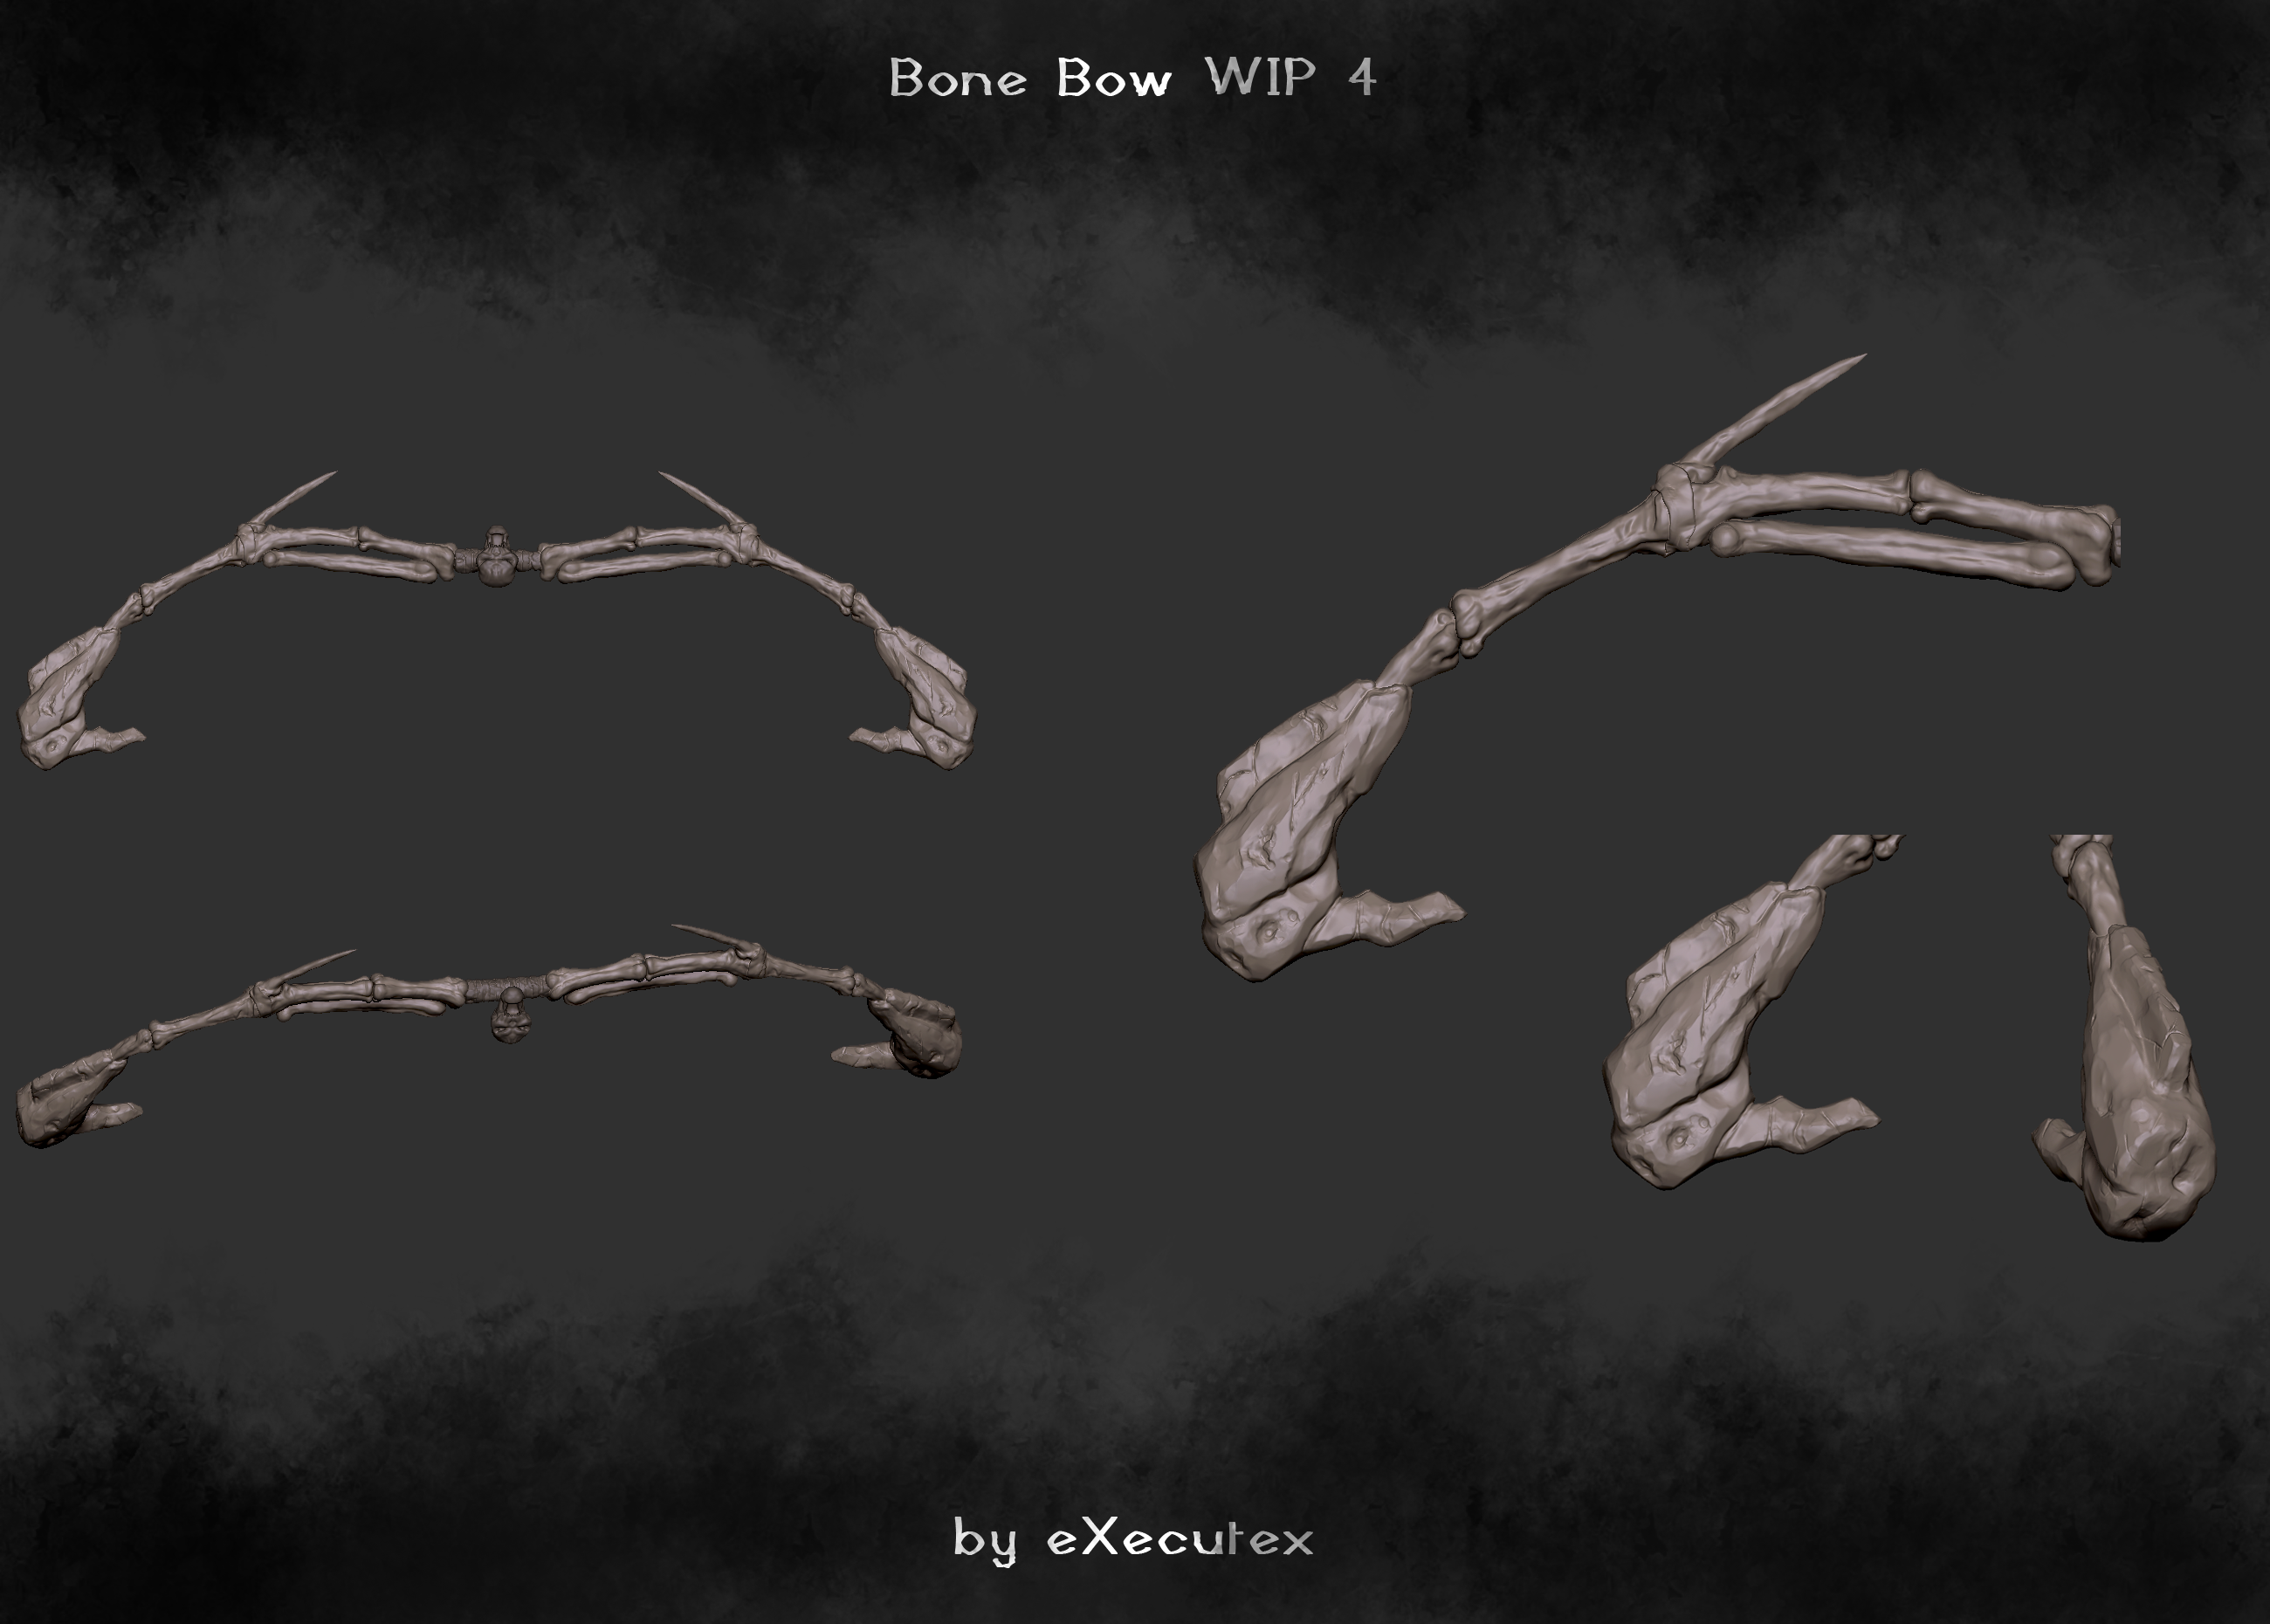 bone_bow_wip_4_by_executex-d5rb0d3.png